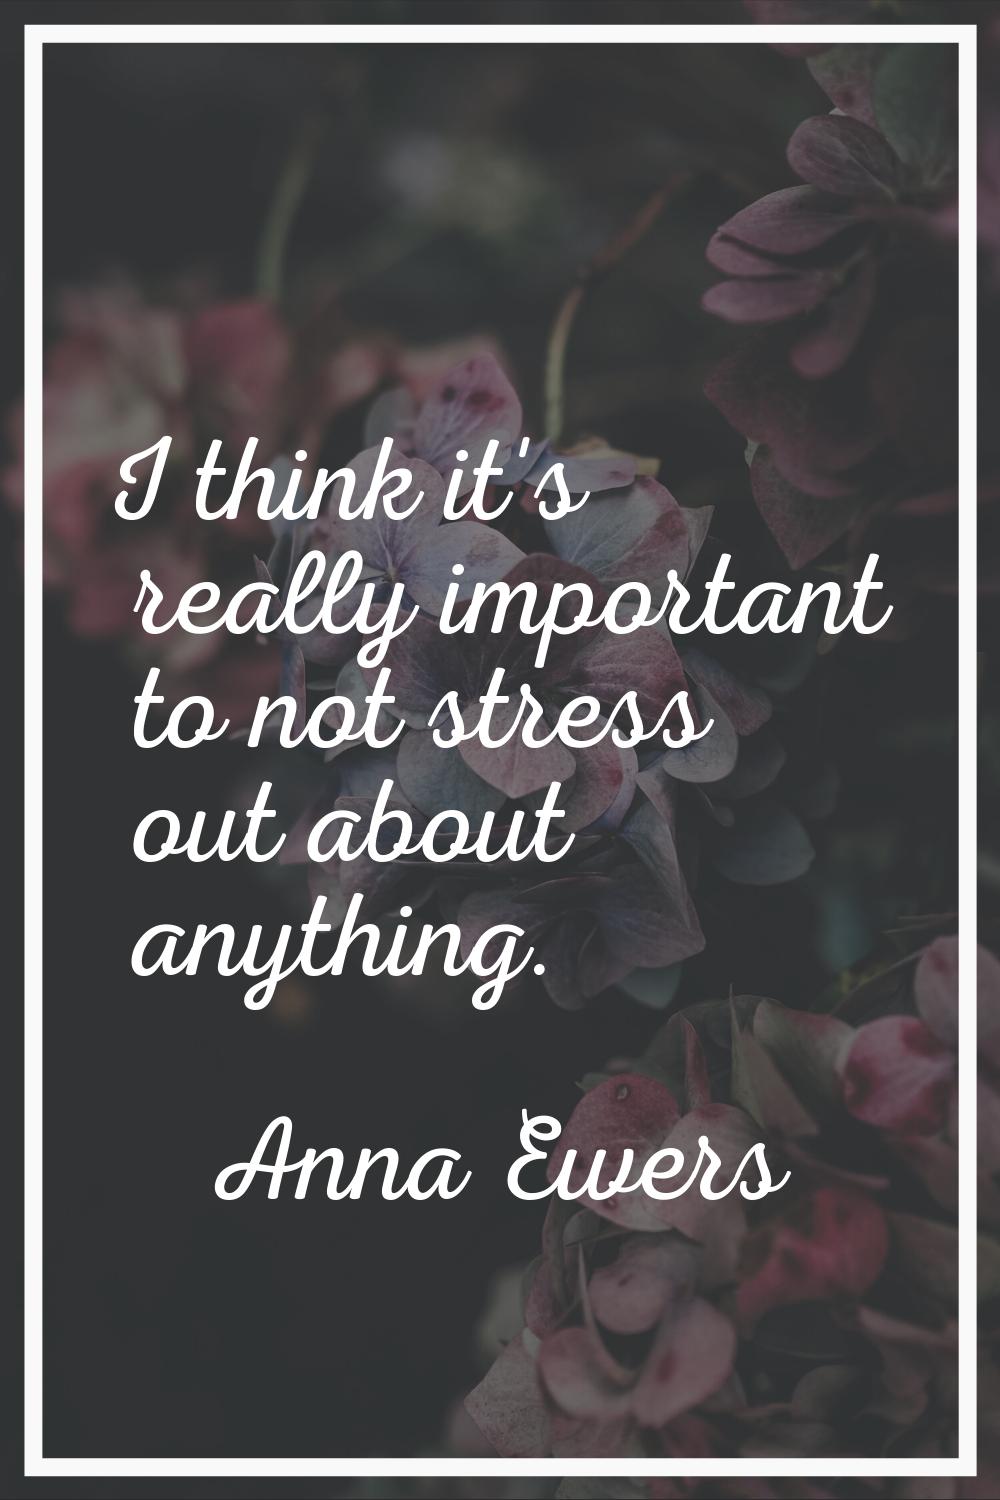 I think it's really important to not stress out about anything.